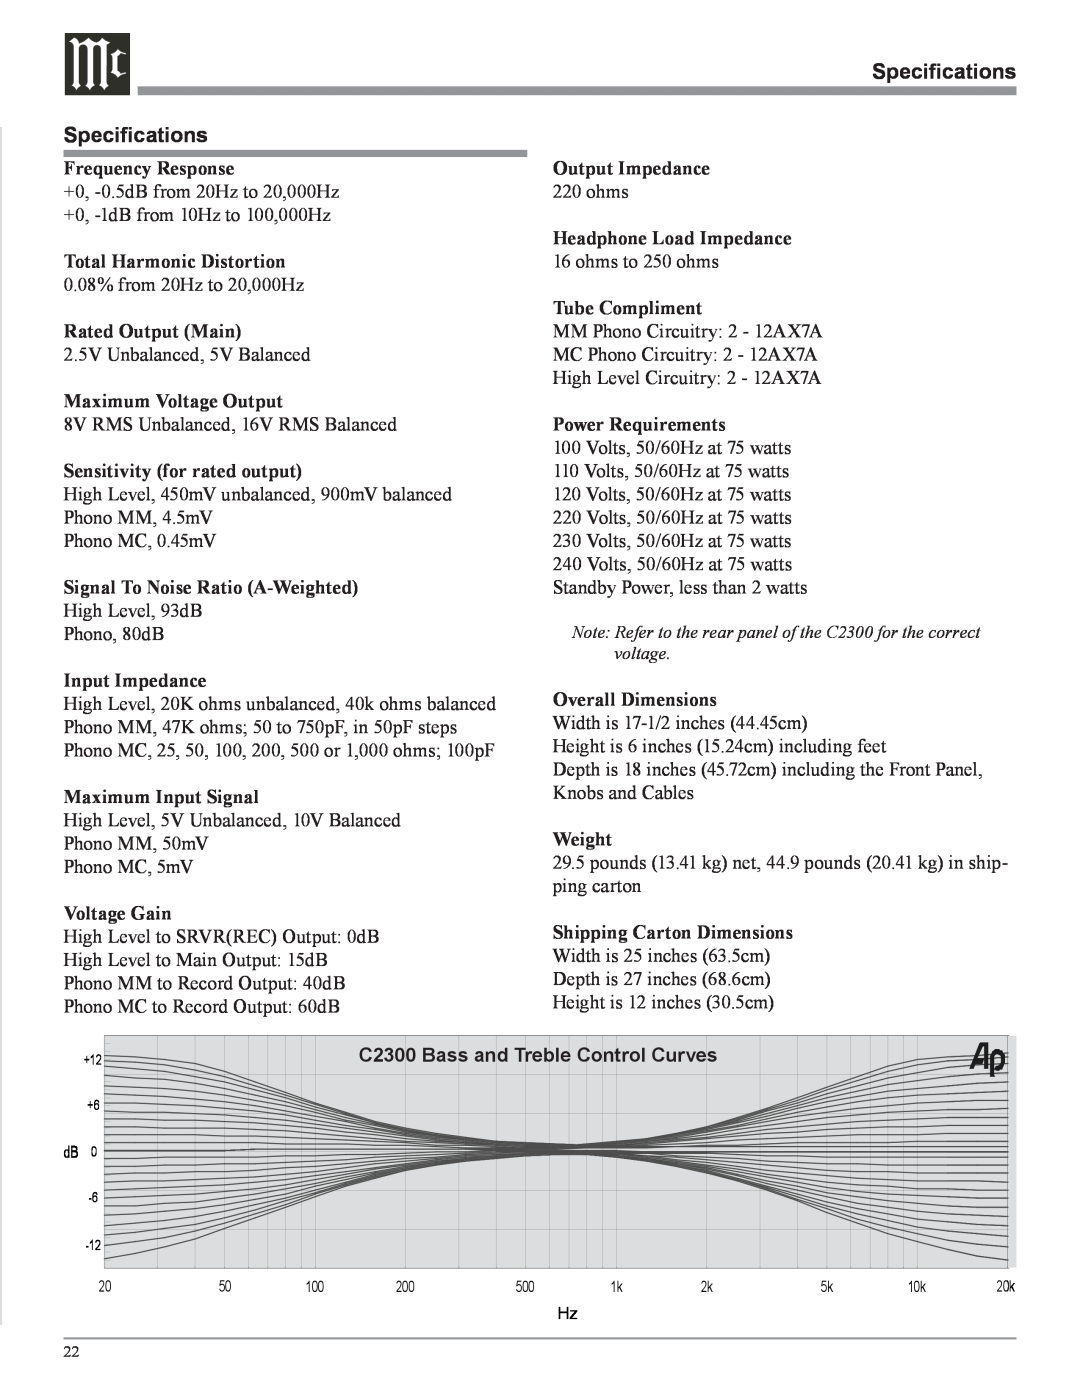 McIntosh owner manual Specifications Specifications, C2300 Bass and Treble Control Curves 